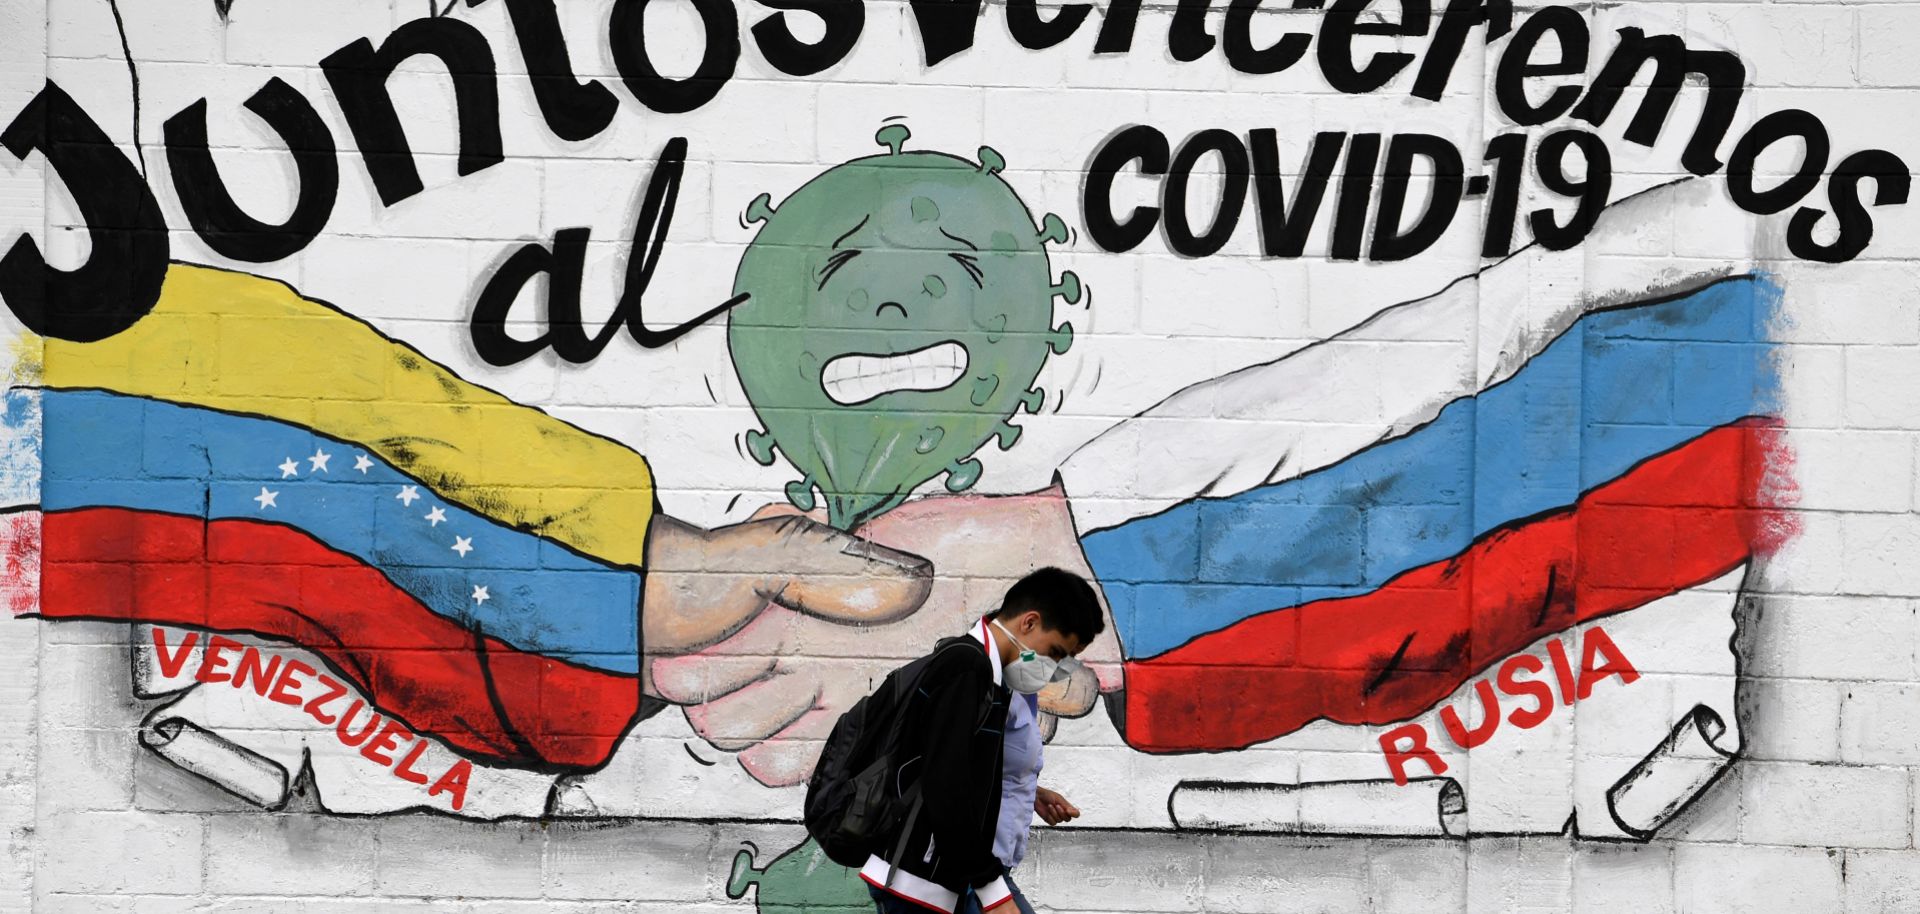 People walk past a mural of the Venezuelan and Russian flags that reads "Together we will defeat COVID-19" in Caracas, Venezuela, on March 4, 2021.